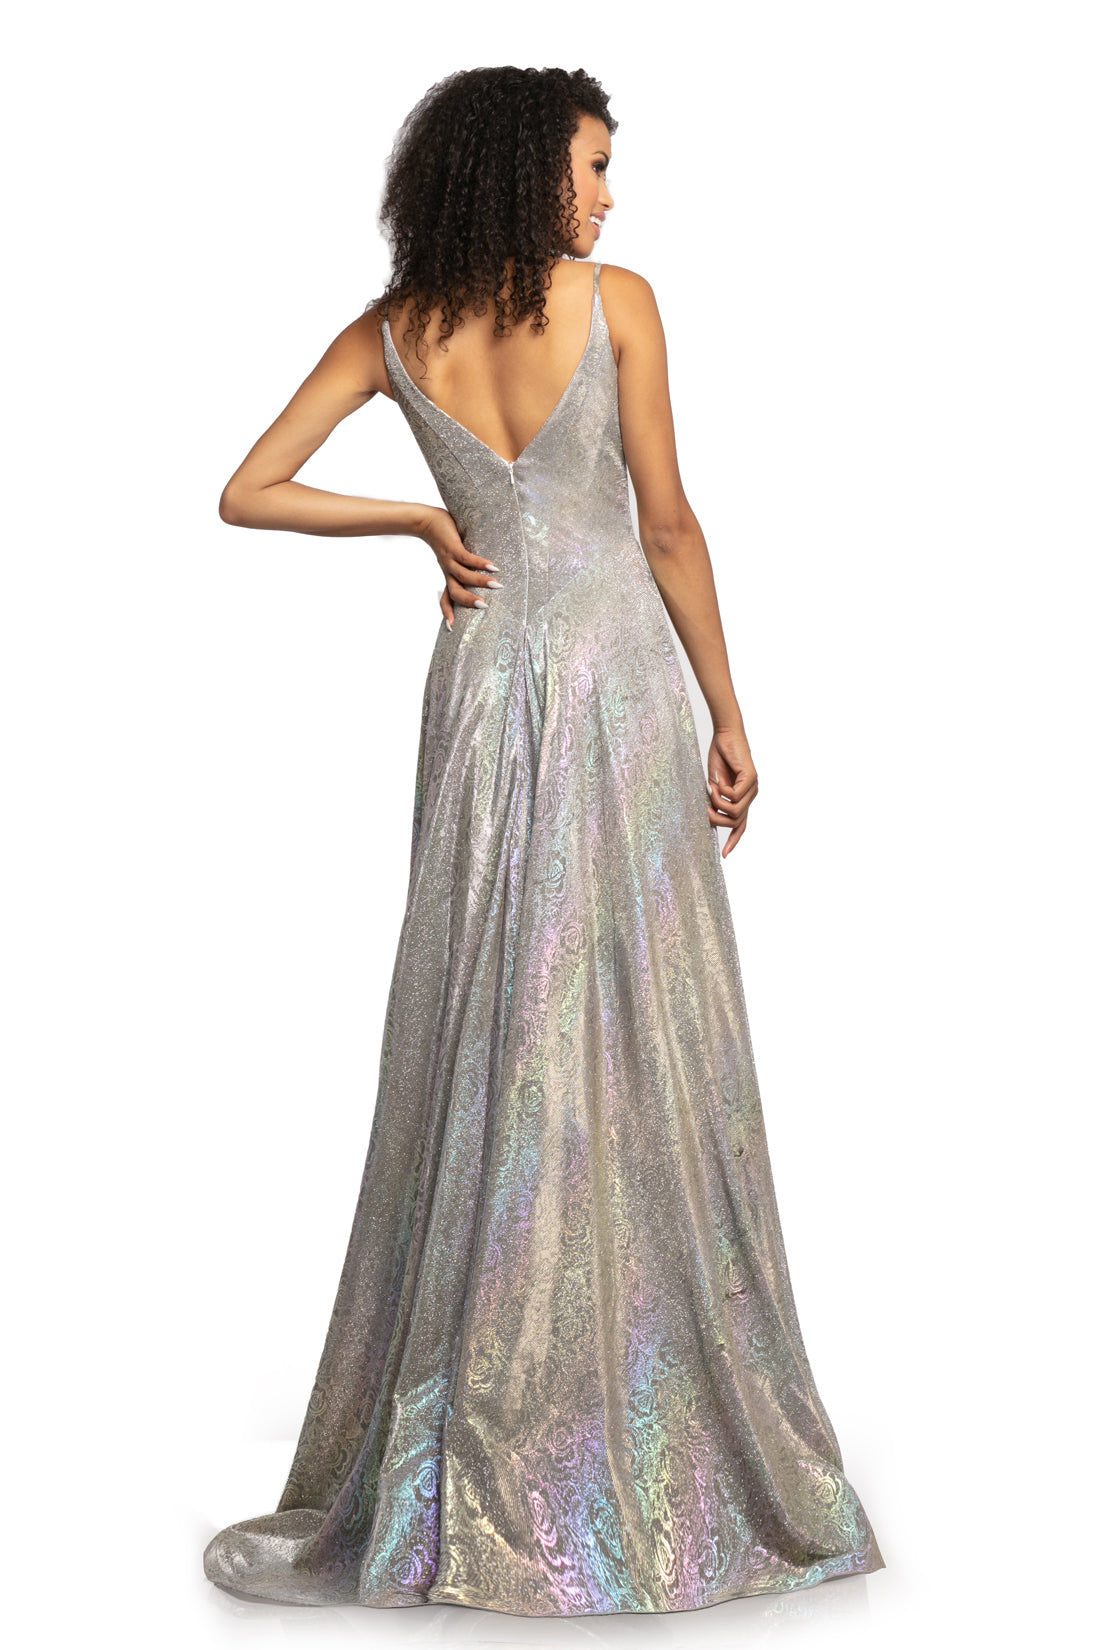 Johnathan Kayne 2094 is a metallic holographic Prom Dress, Pageant Gown & Formal Evening Wear. This long Gown Features a Metallic Glitter Floral Rose Design with a plunging neckline and spaghetti straps. This fitted bodice flows into a beautiful color changing A line skirt.